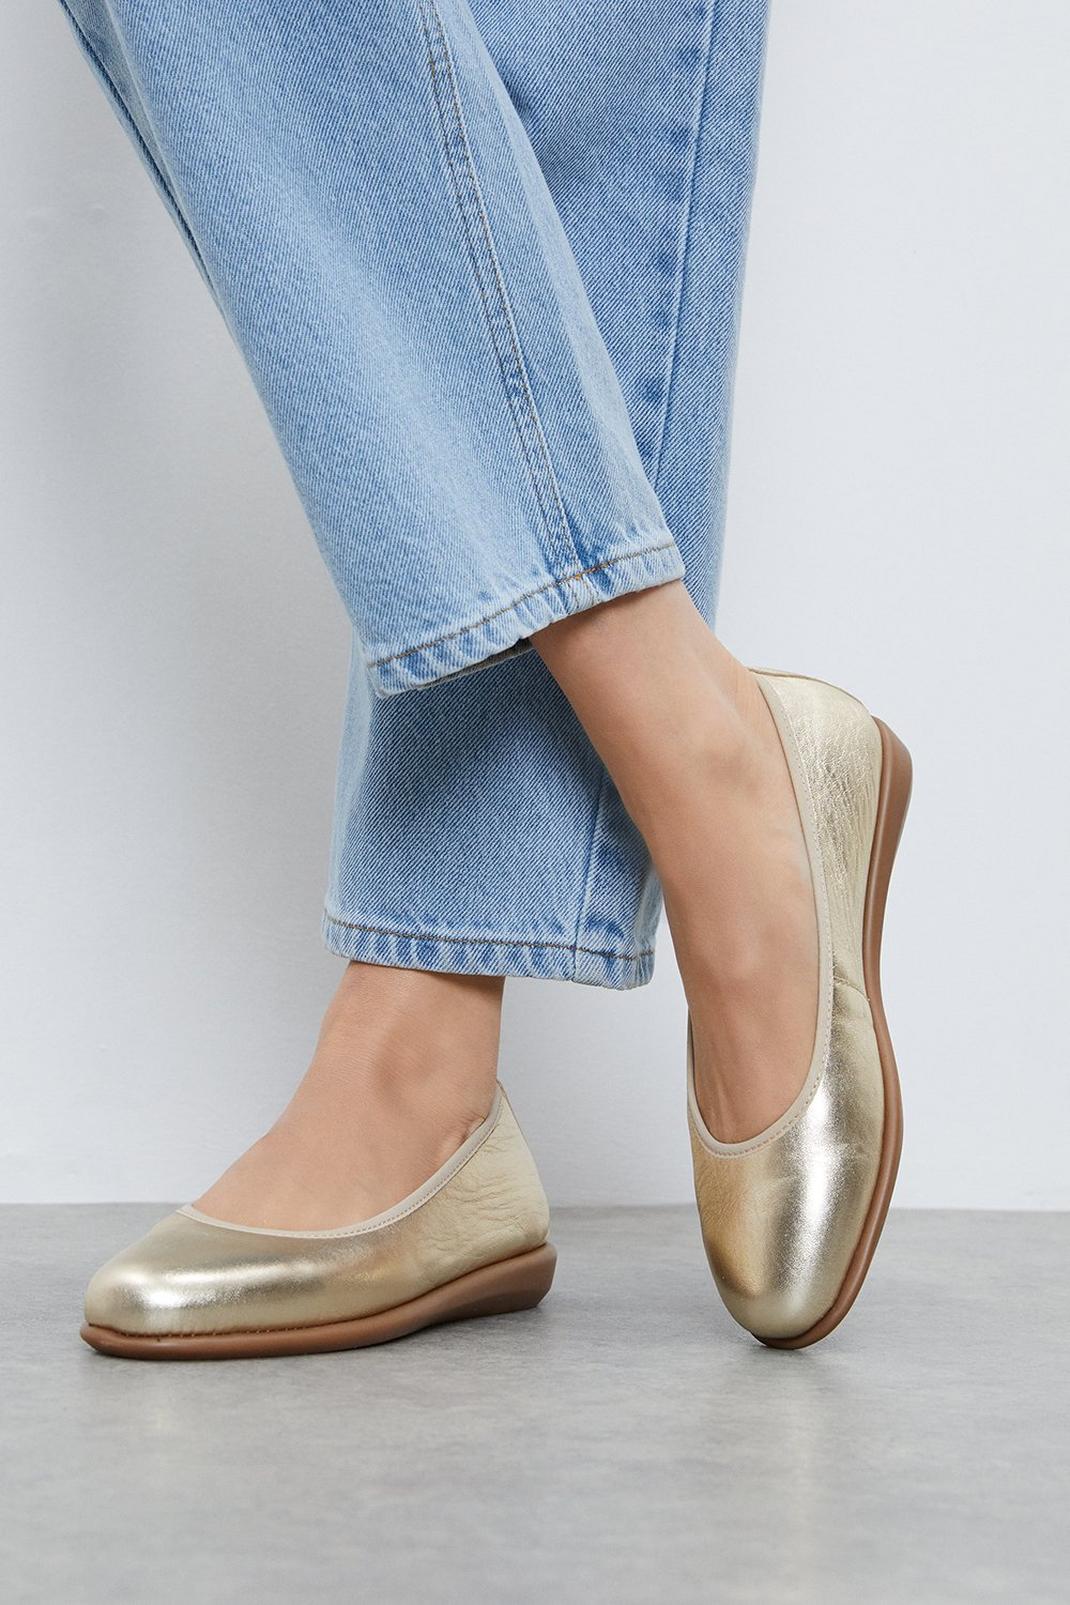 Gold Good For The Sole: Tonya Leather Comfort Ballet Flats image number 1